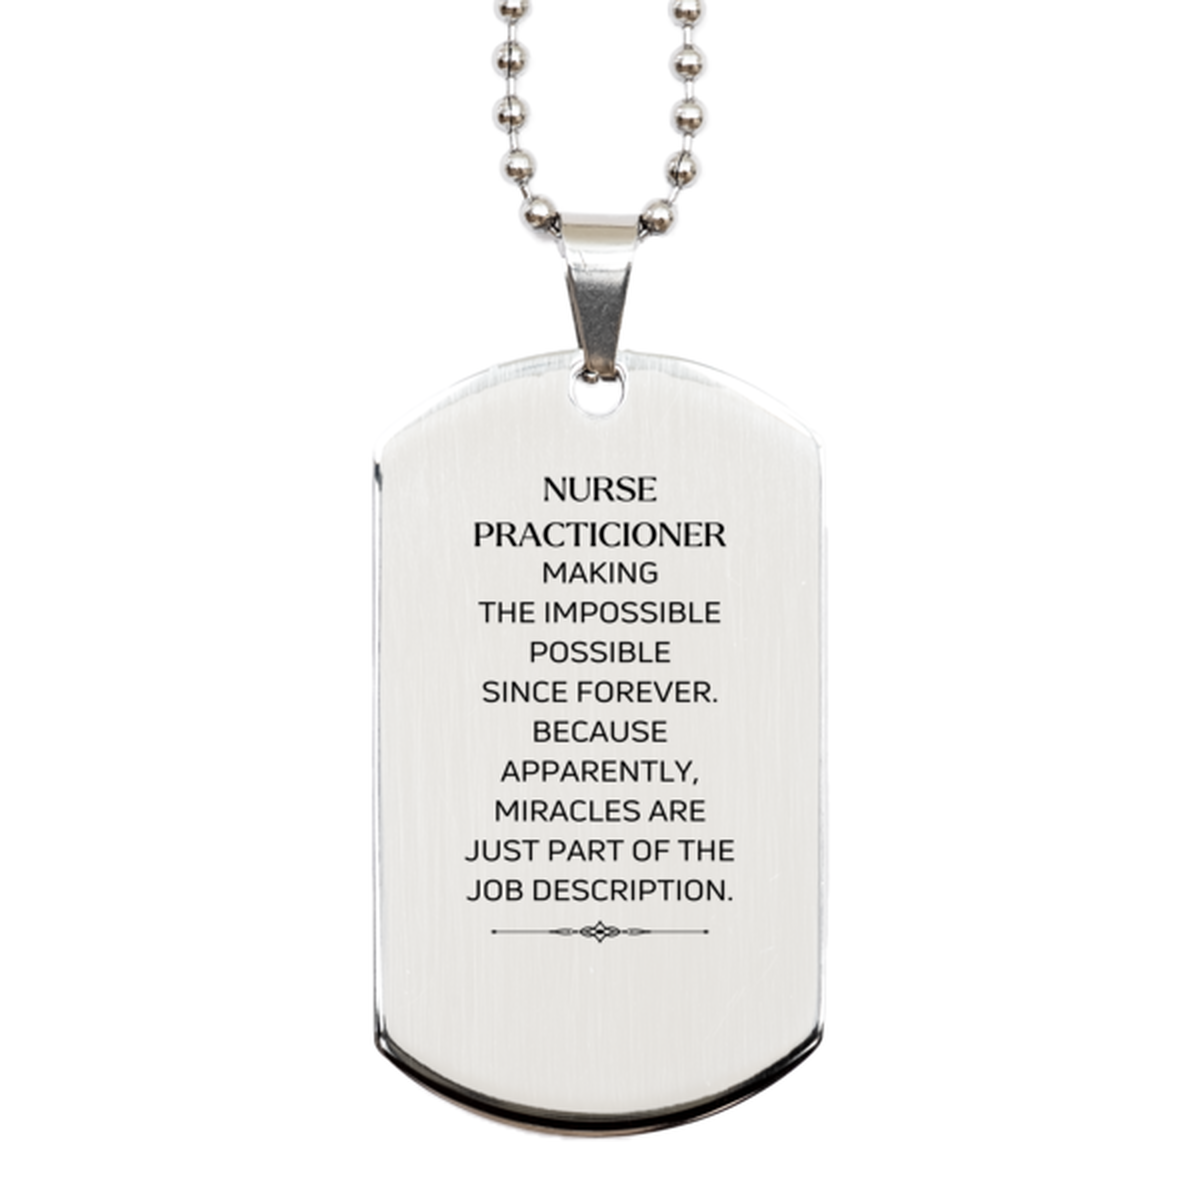 Funny Nurse Practicioner Gifts, Miracles are just part of the job description, Inspirational Birthday Silver Dog Tag For Nurse Practicioner, Men, Women, Coworkers, Friends, Boss